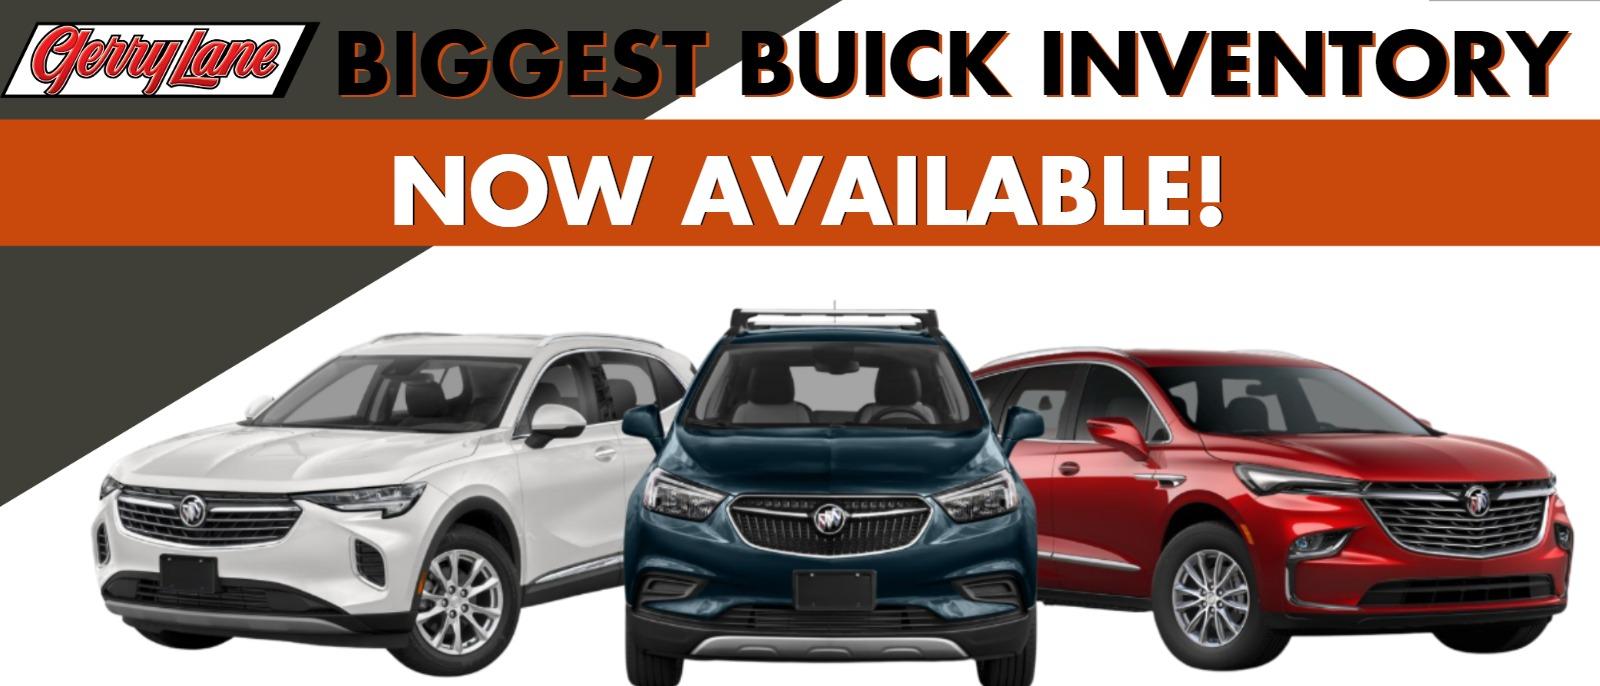 SEE THE BUICK INVENTORY AT GERRY LANE